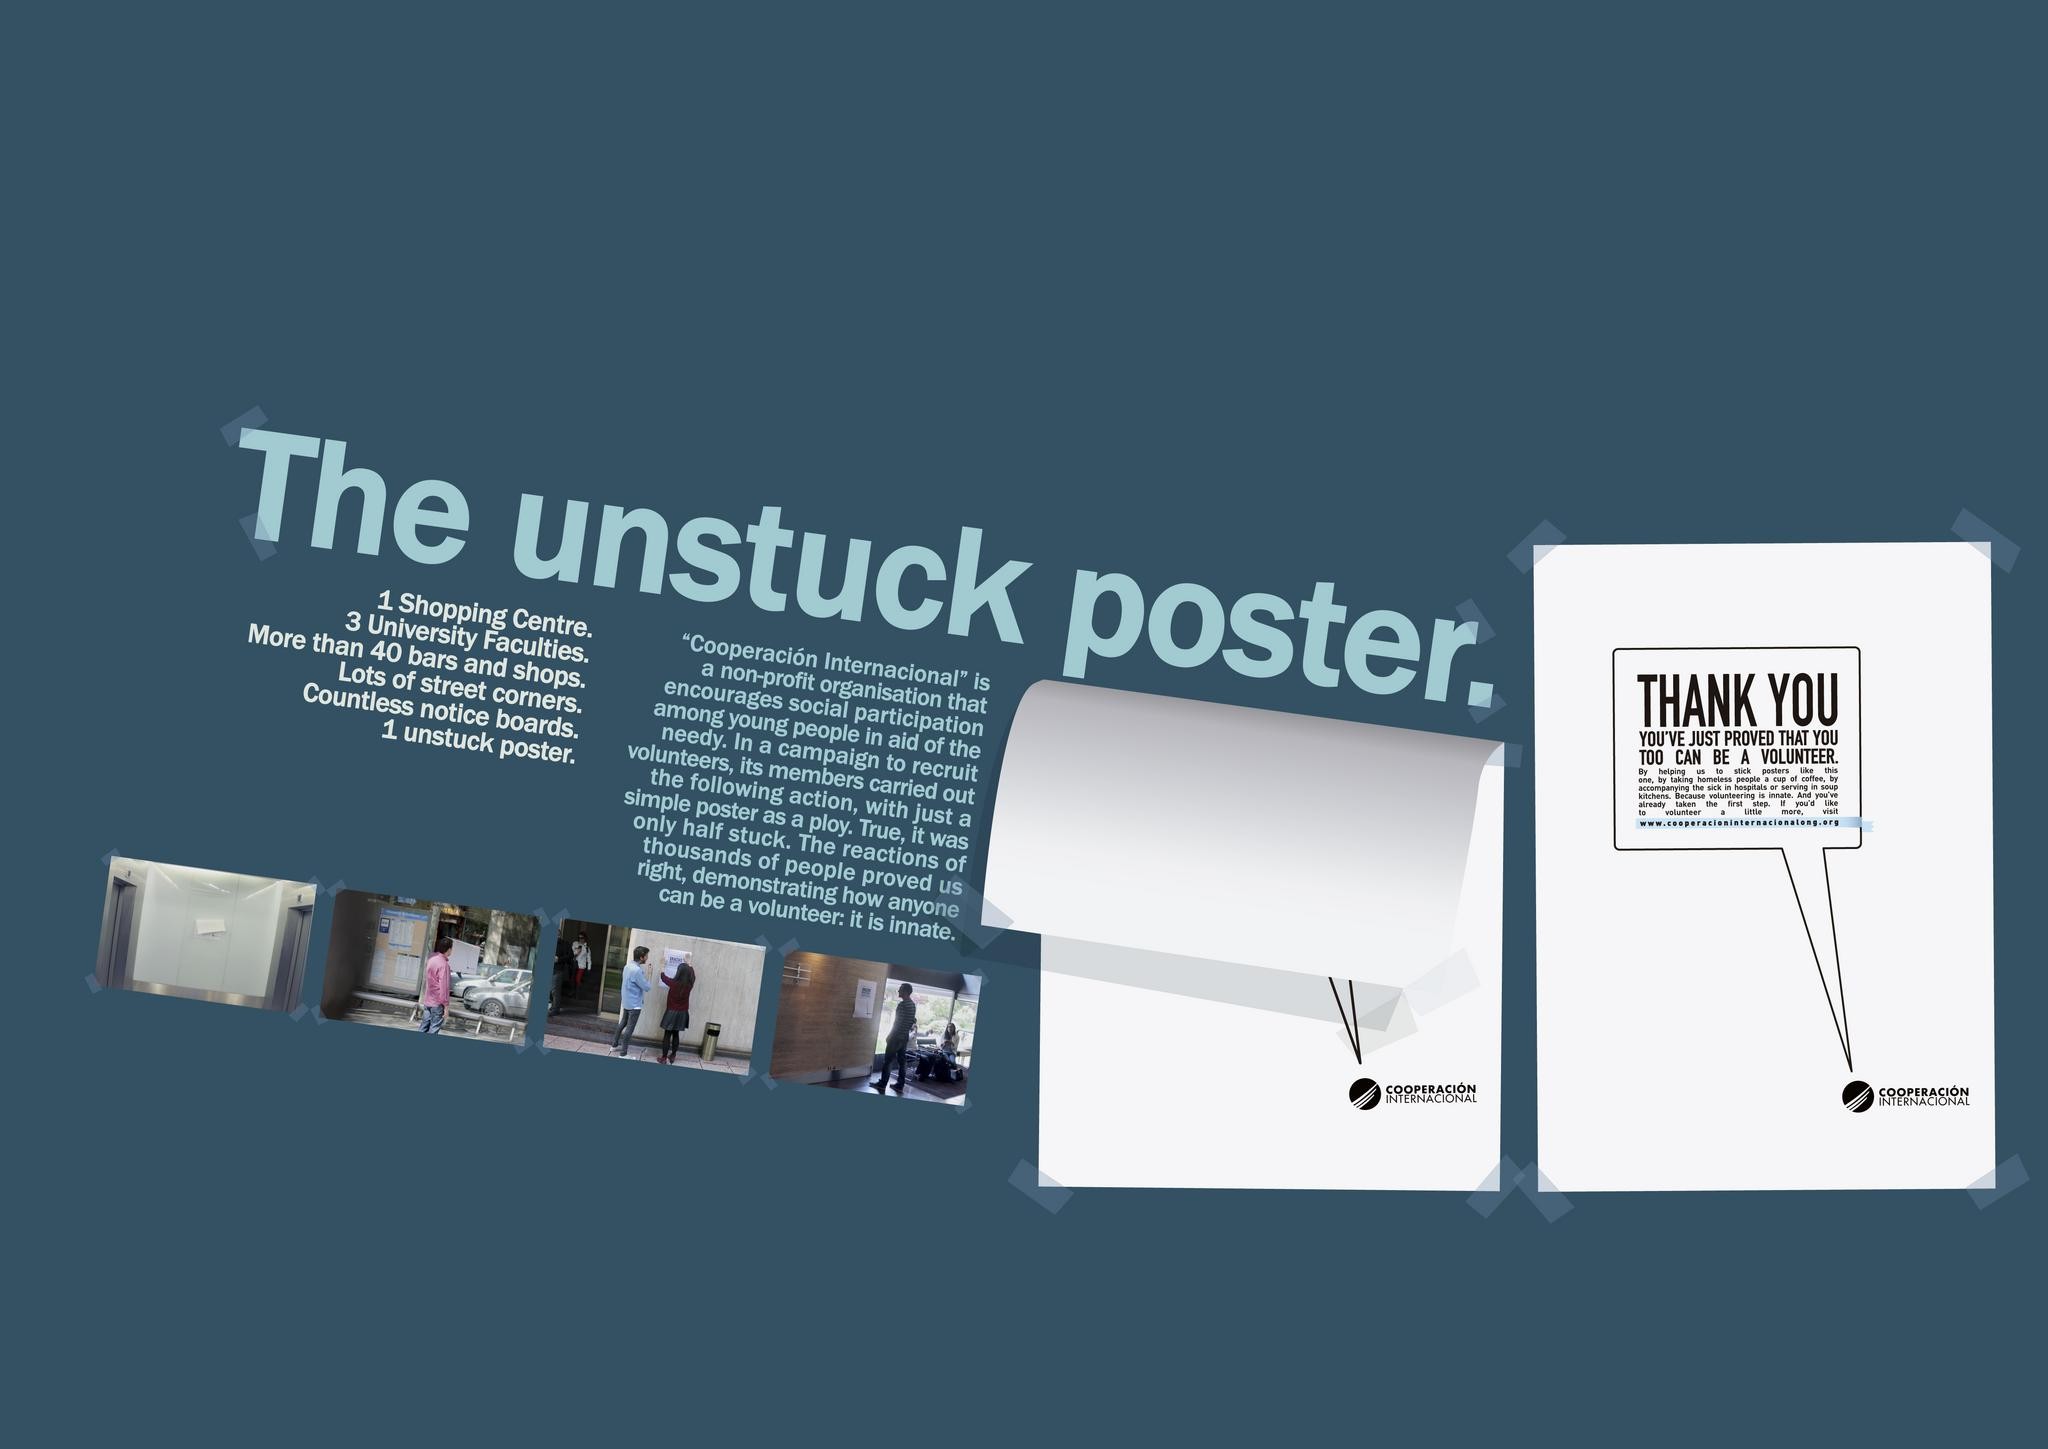 THE UNSTUCK POSTER